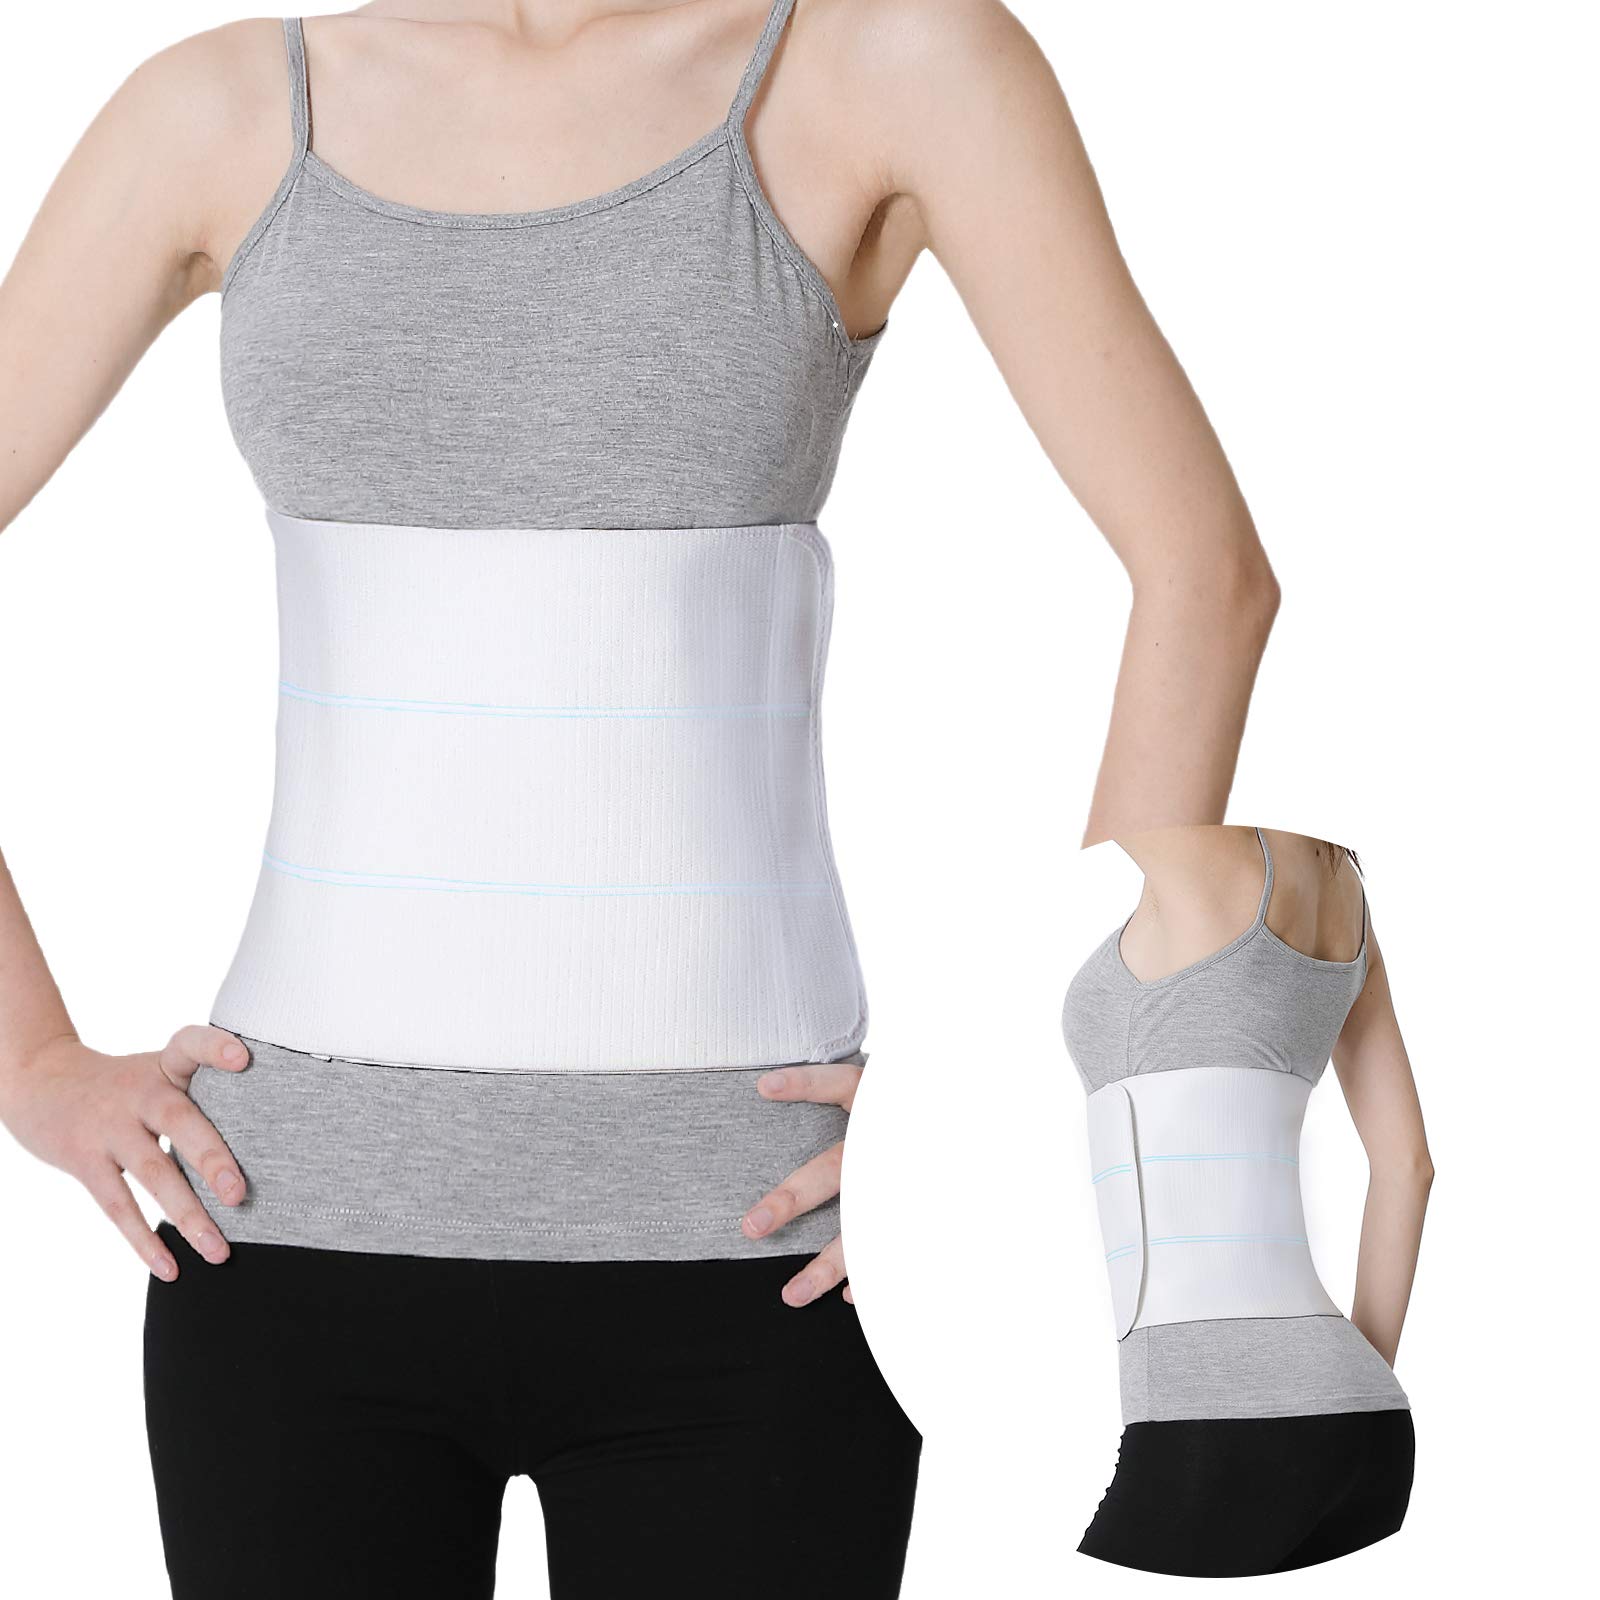 Abdominal Binder for Umbilical Hernias Post Surgery for Men and